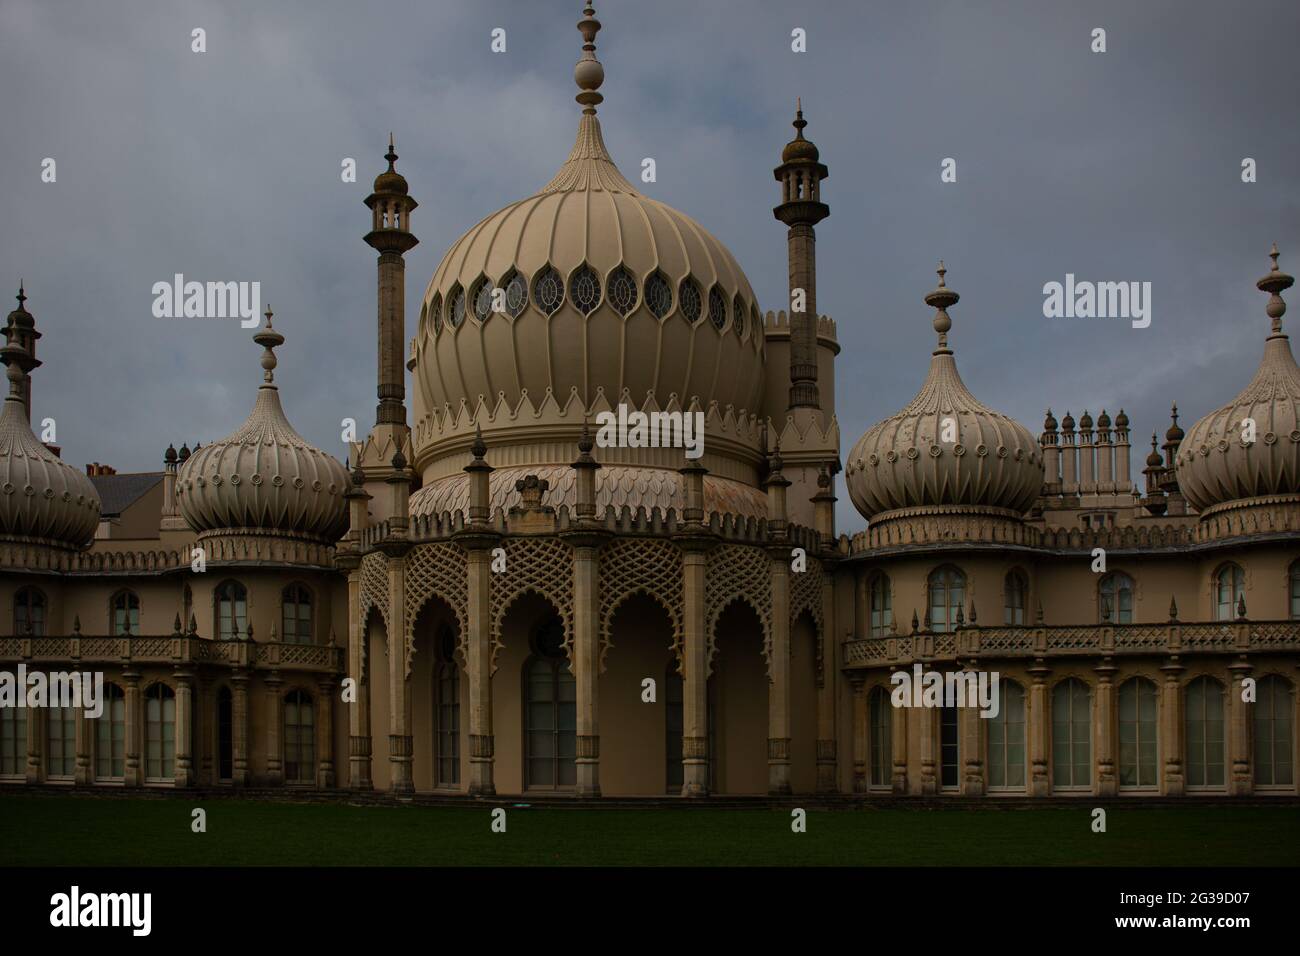 Royal Pavilion, a palace in the centre of Brighton, Great Britain Stock Photo